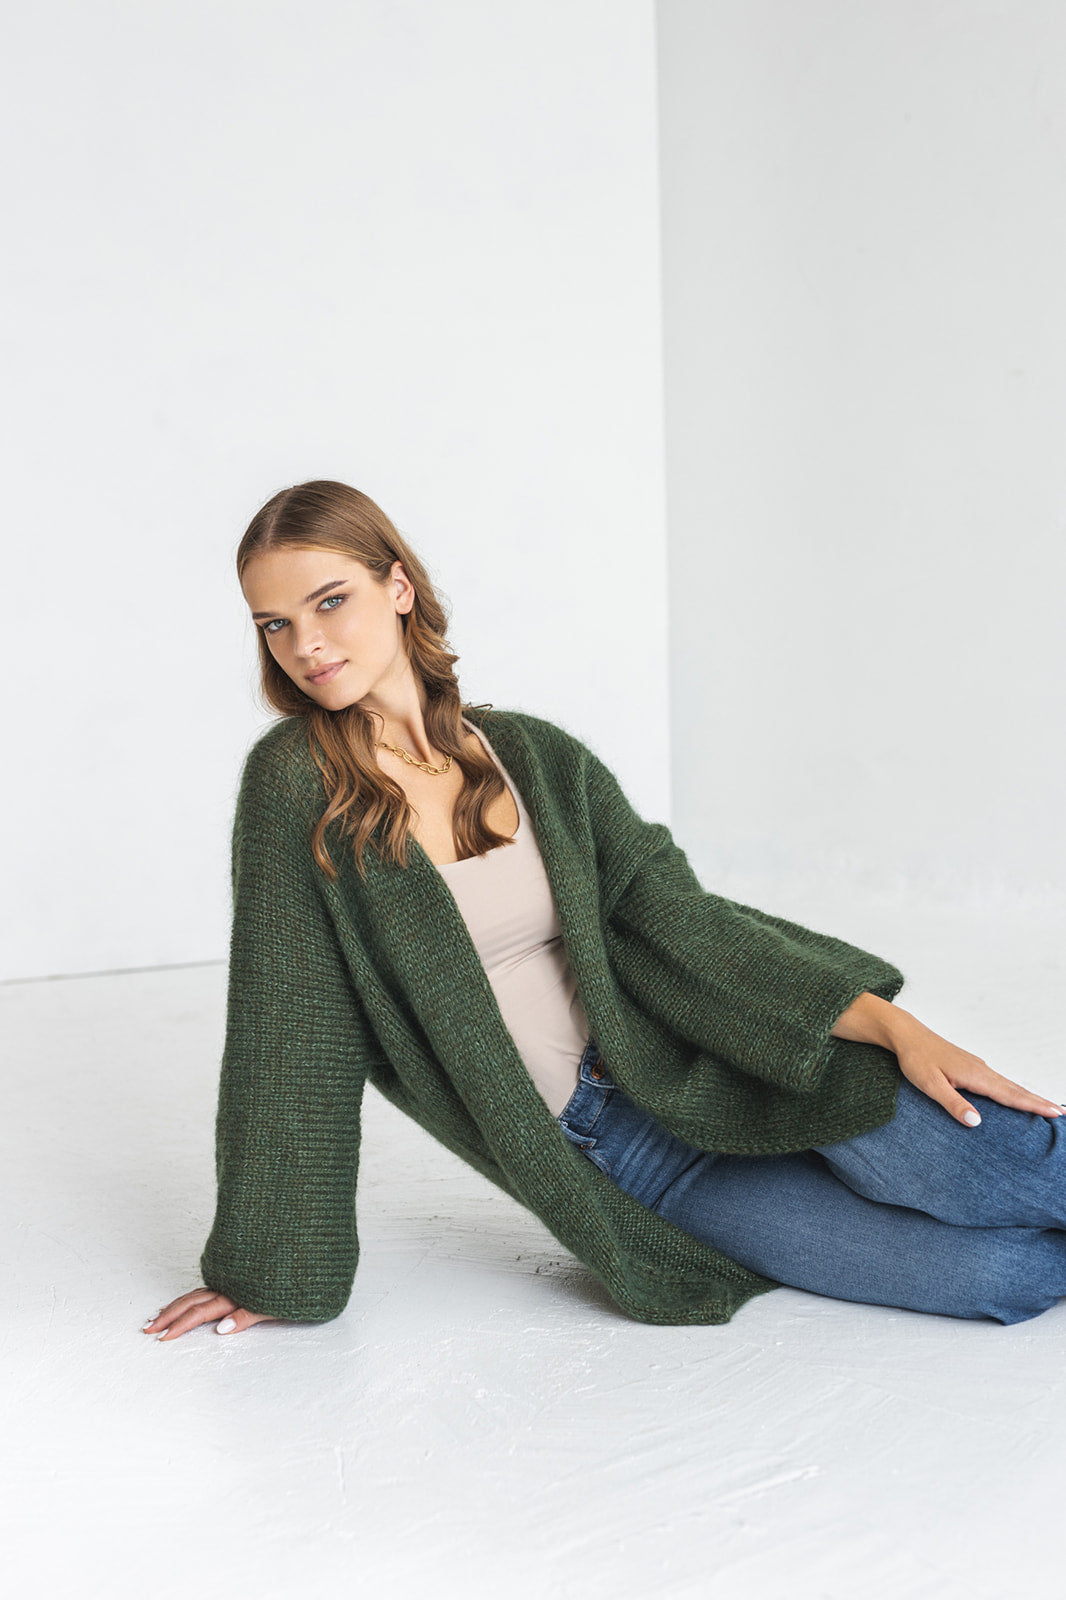 Green cable knit kimono mohair cardigan, oversized fluffy alpaca wool blend chunky knitted sweater, wide sleeves thick fuzzy jacket, gift